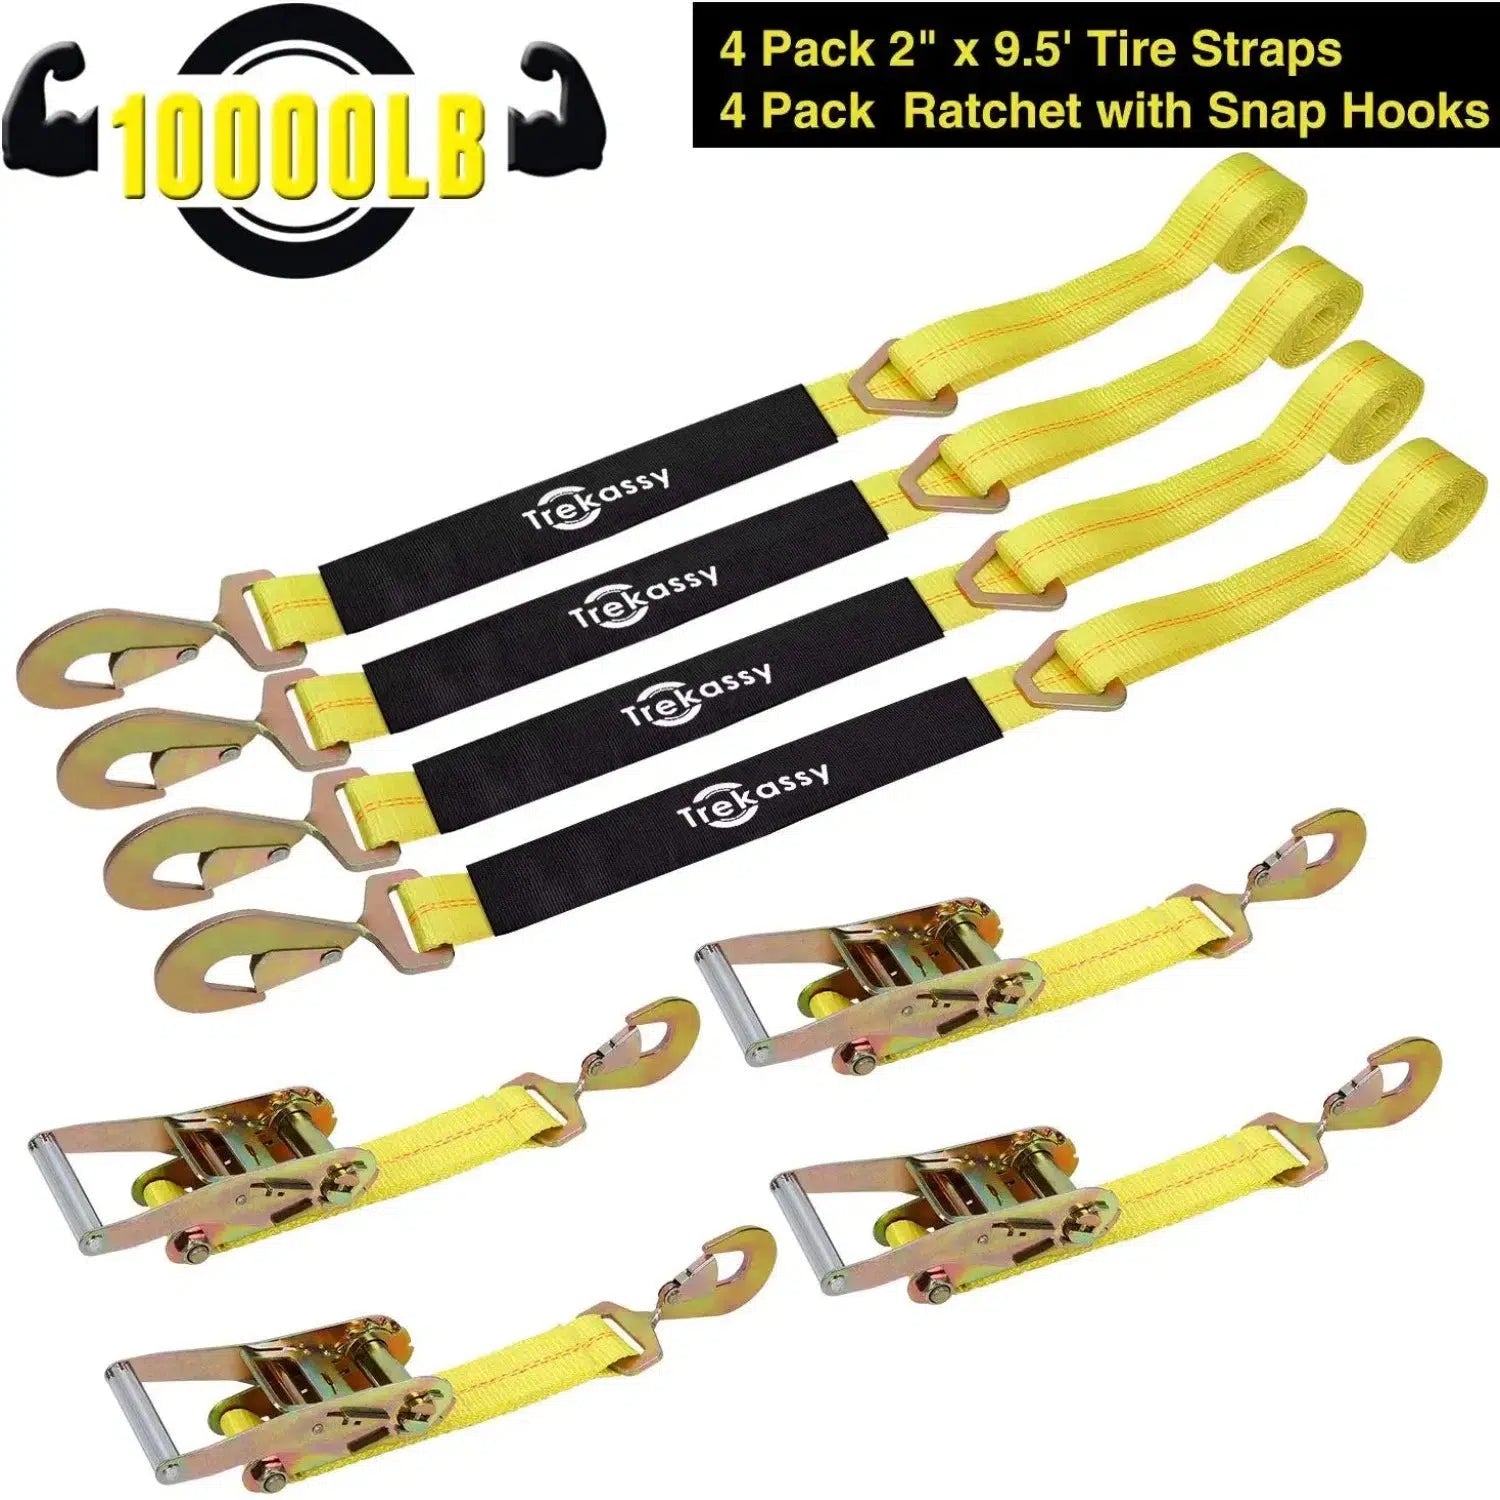 Trekassy 4 Pack 2” x 114” Car Axle Straps Ratchet Tie Downs System with Snap Hooks